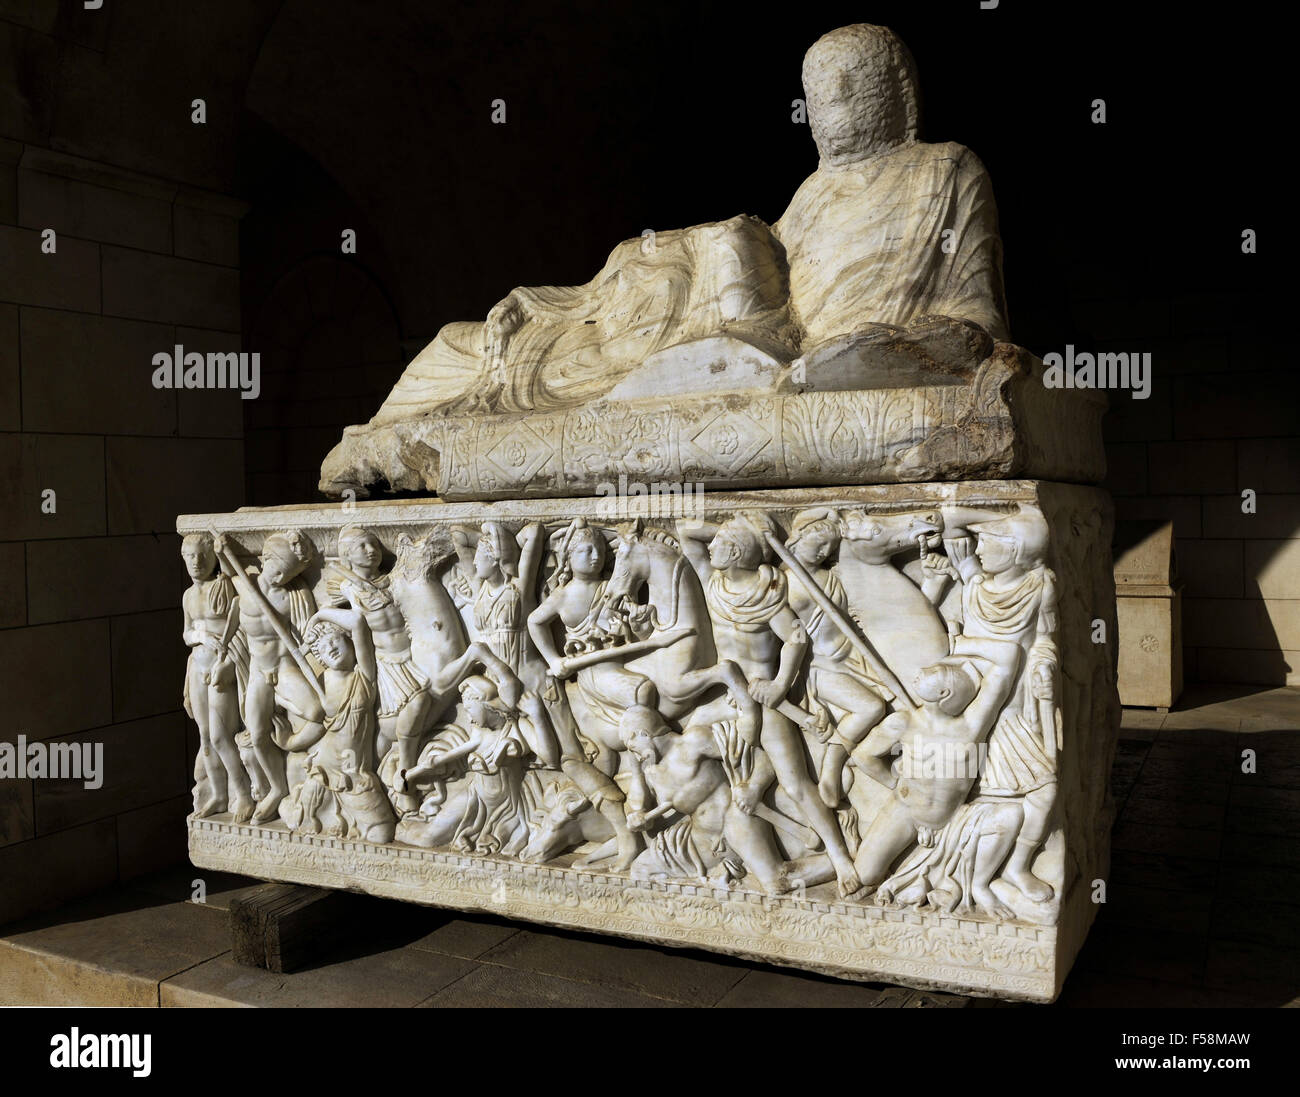 Amazon sarcophagus. Marble. Tel Mevorah. Roman Period. Early 3rd century AD. Battle between the Amazons and the Greeks. Relief. The lid bears the unfinished images of the deceased and his wife. Rockefeller Archaeological Museum. Jerusalem. Israel. Stock Photo